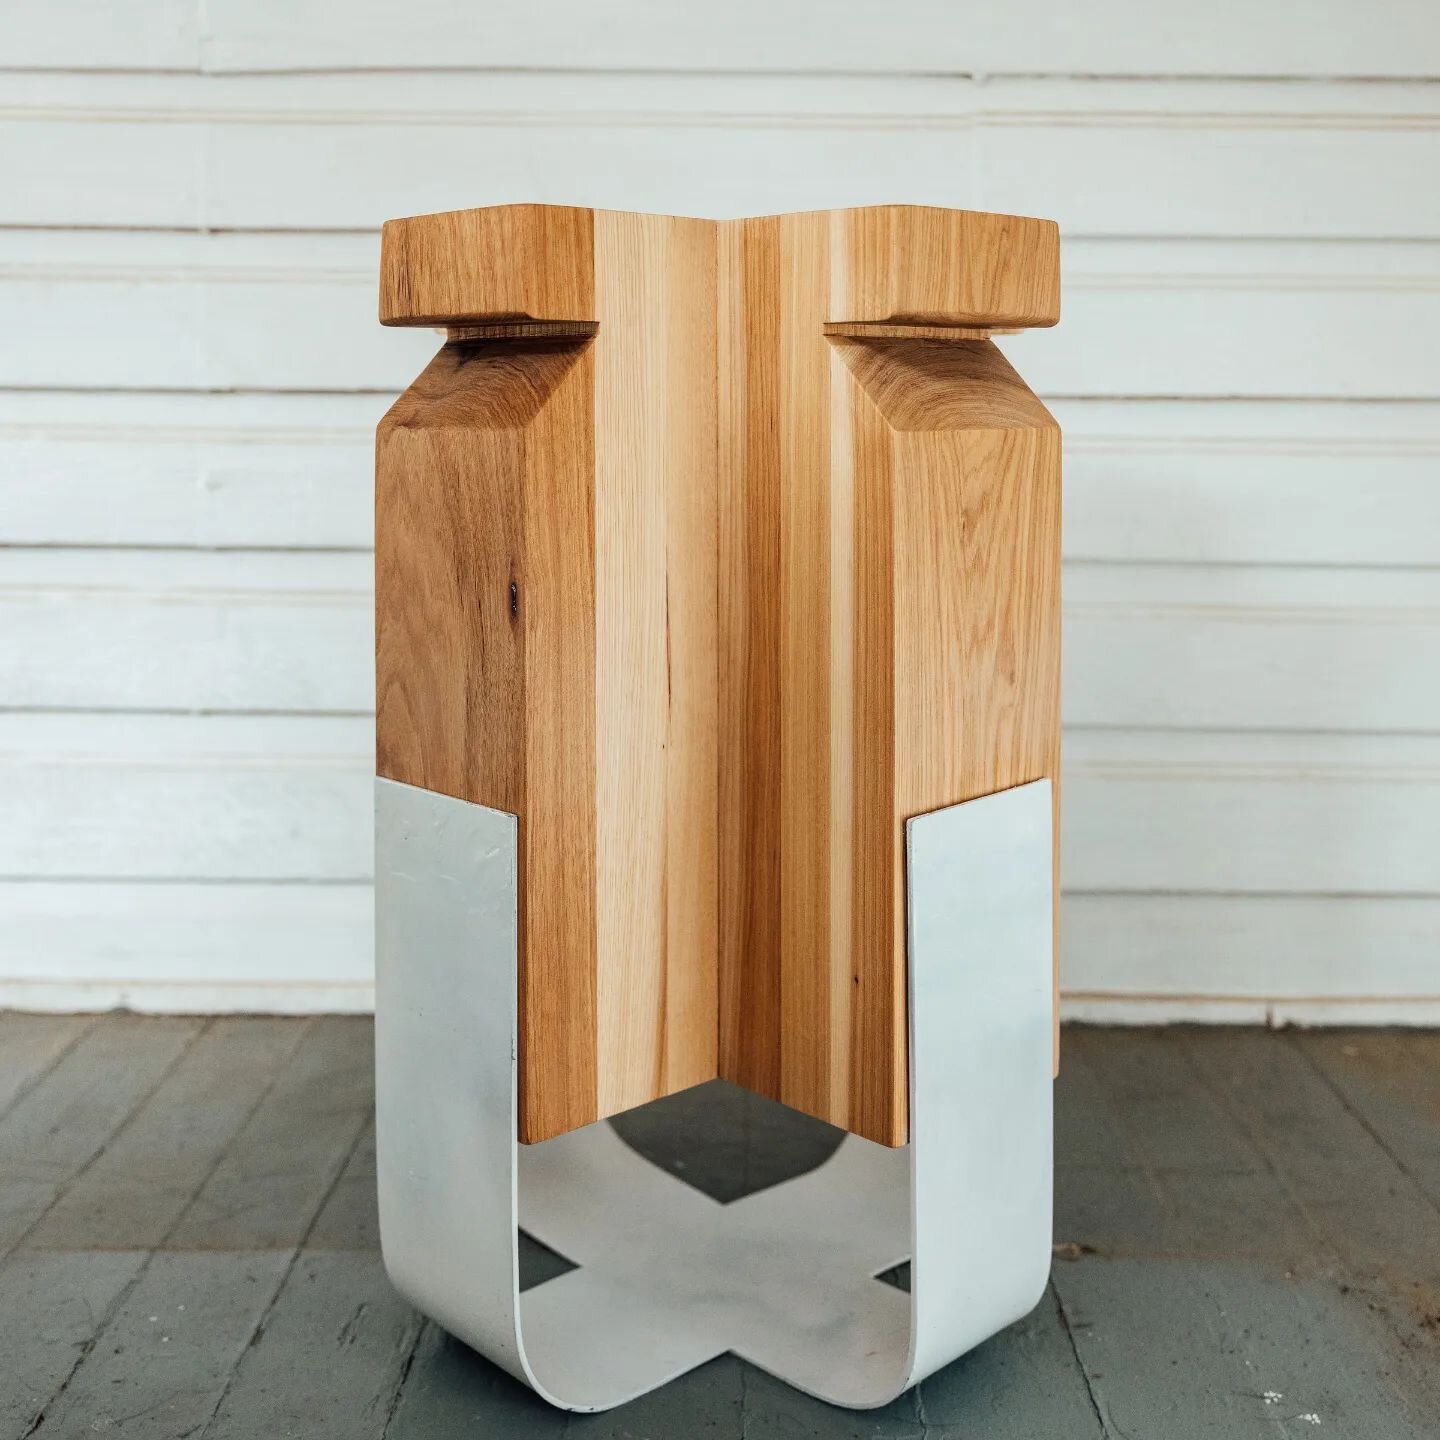 Get your #Pilaster #SideTable today - shown here in #hickory and white steel, this solid beauty is balanced and beautiful, and made to show off that delicious #endgrain. So, what wood and what color base would you imagine? 
.
.
.
.
#woodworker #Custo